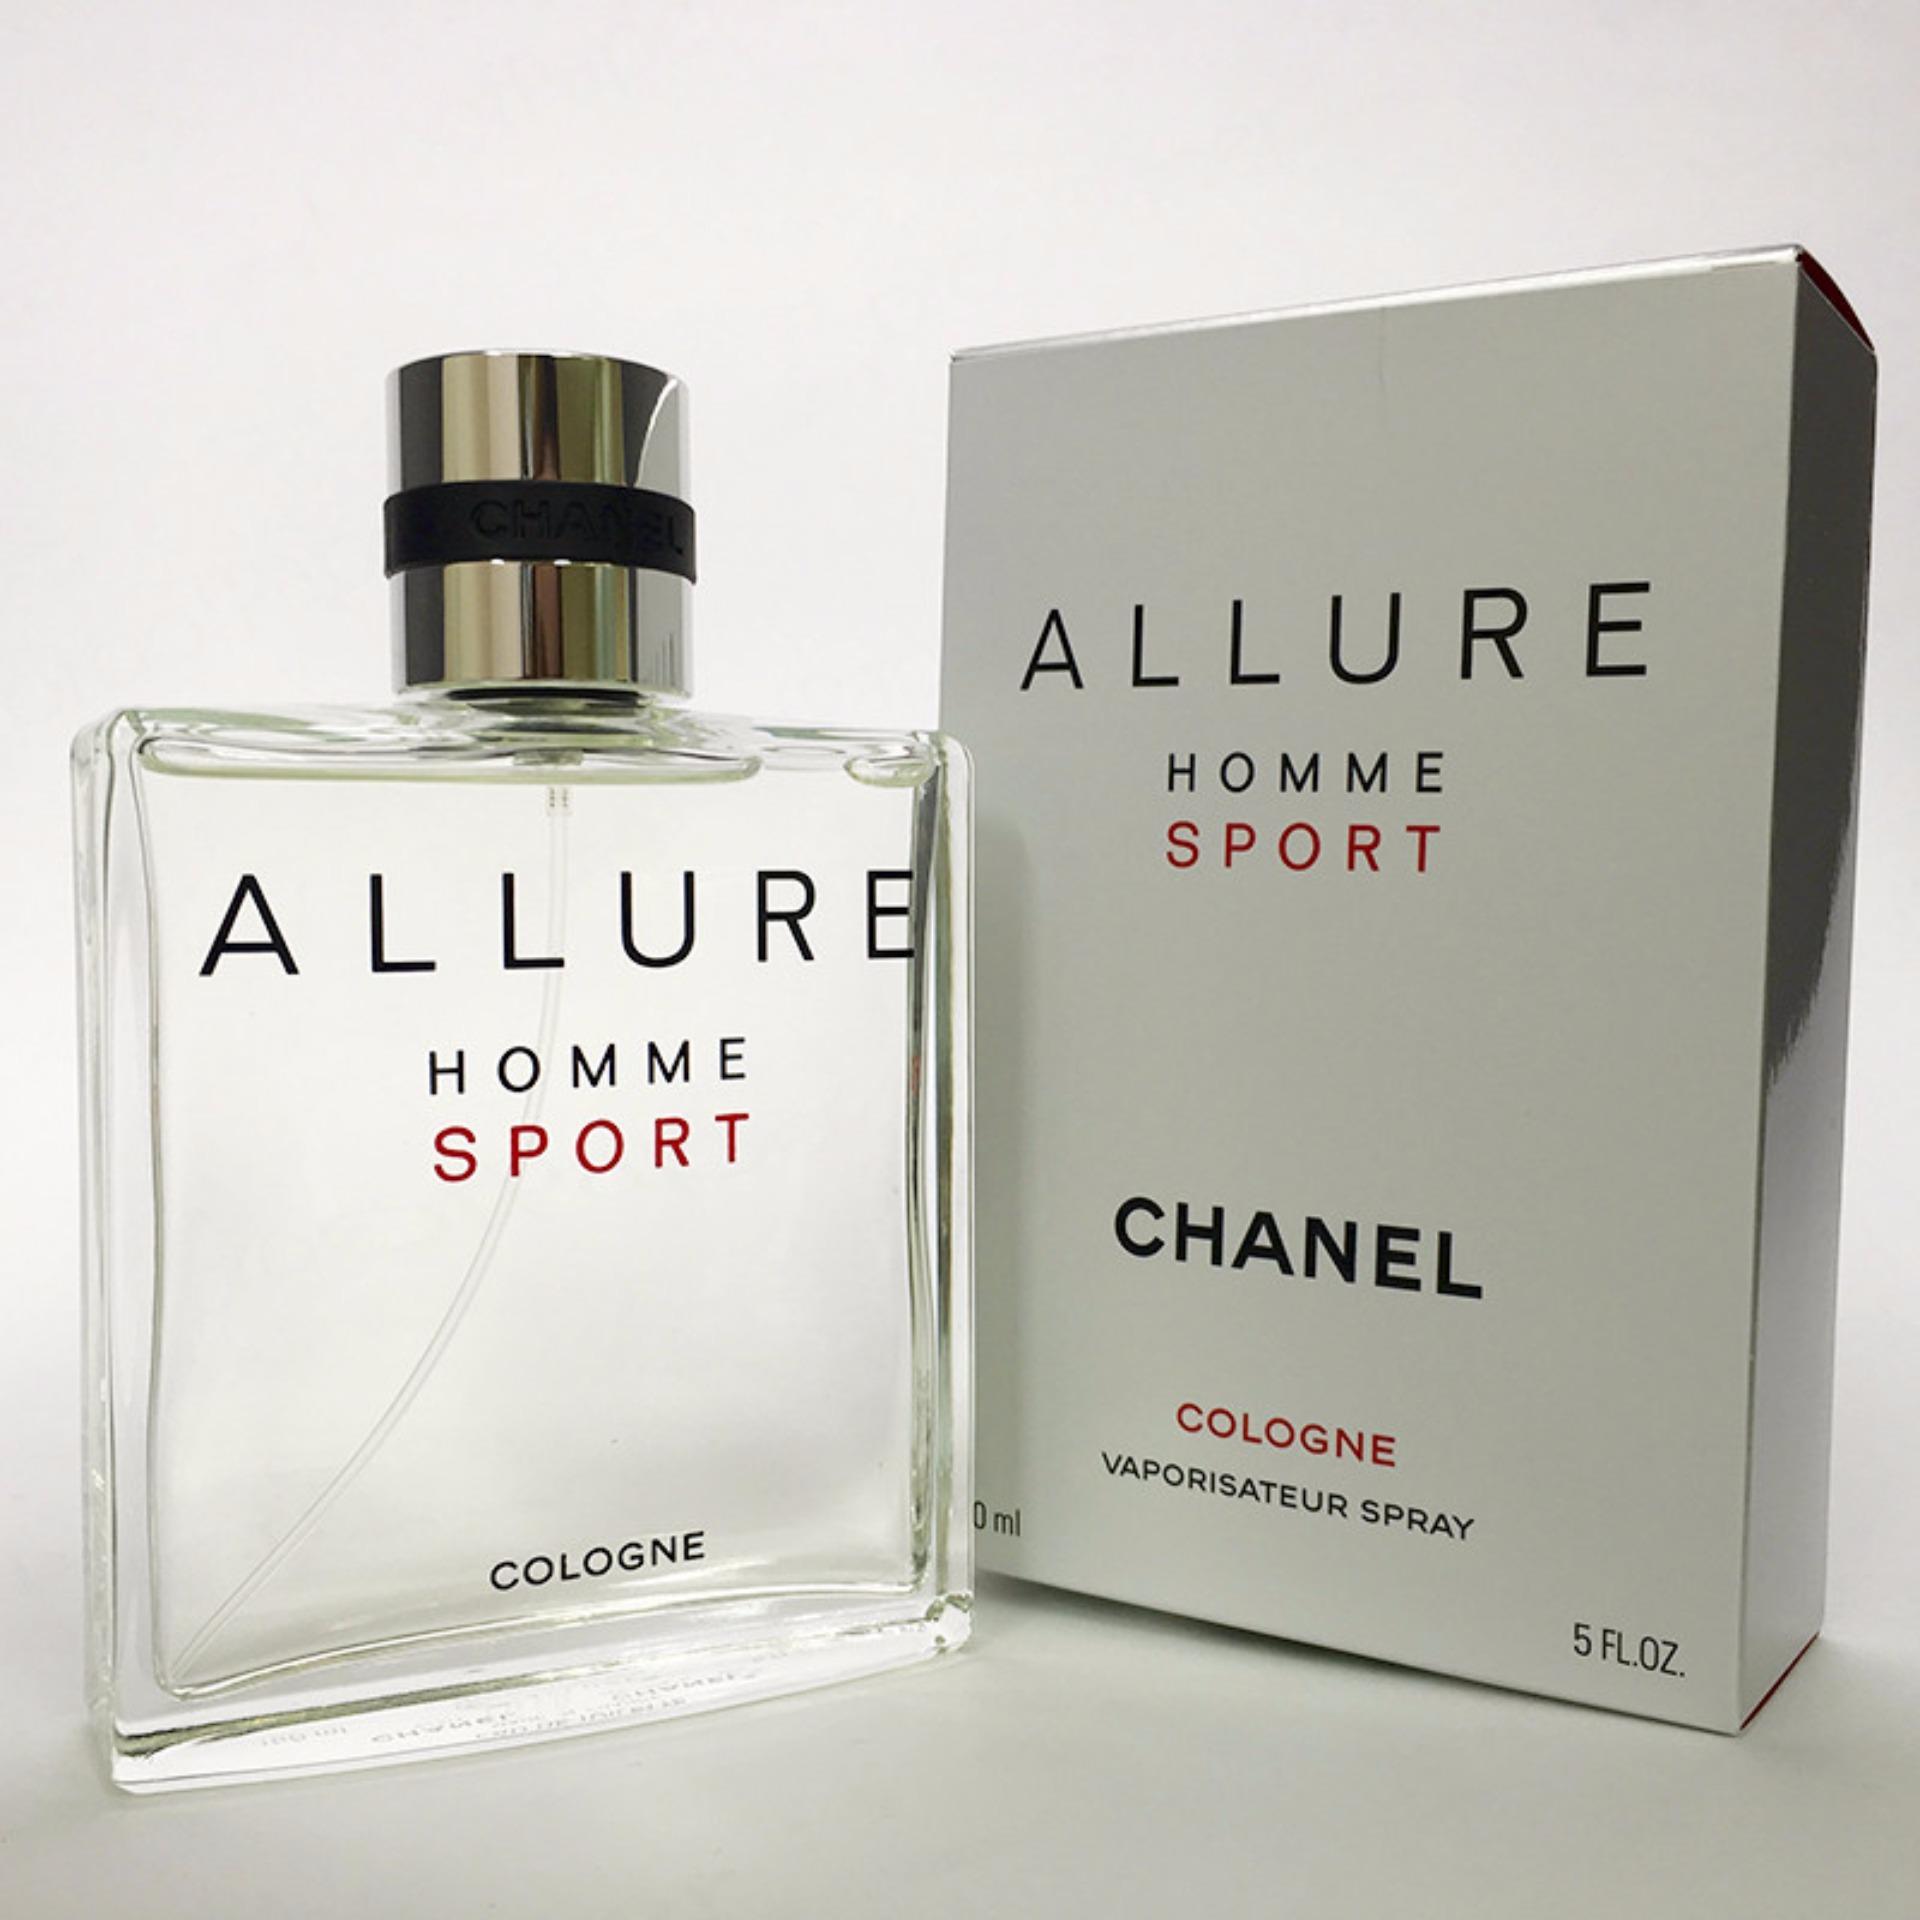 Nước Hoa Chanel Allure Homme Sport Cologne  Your Beauty  Our Duty